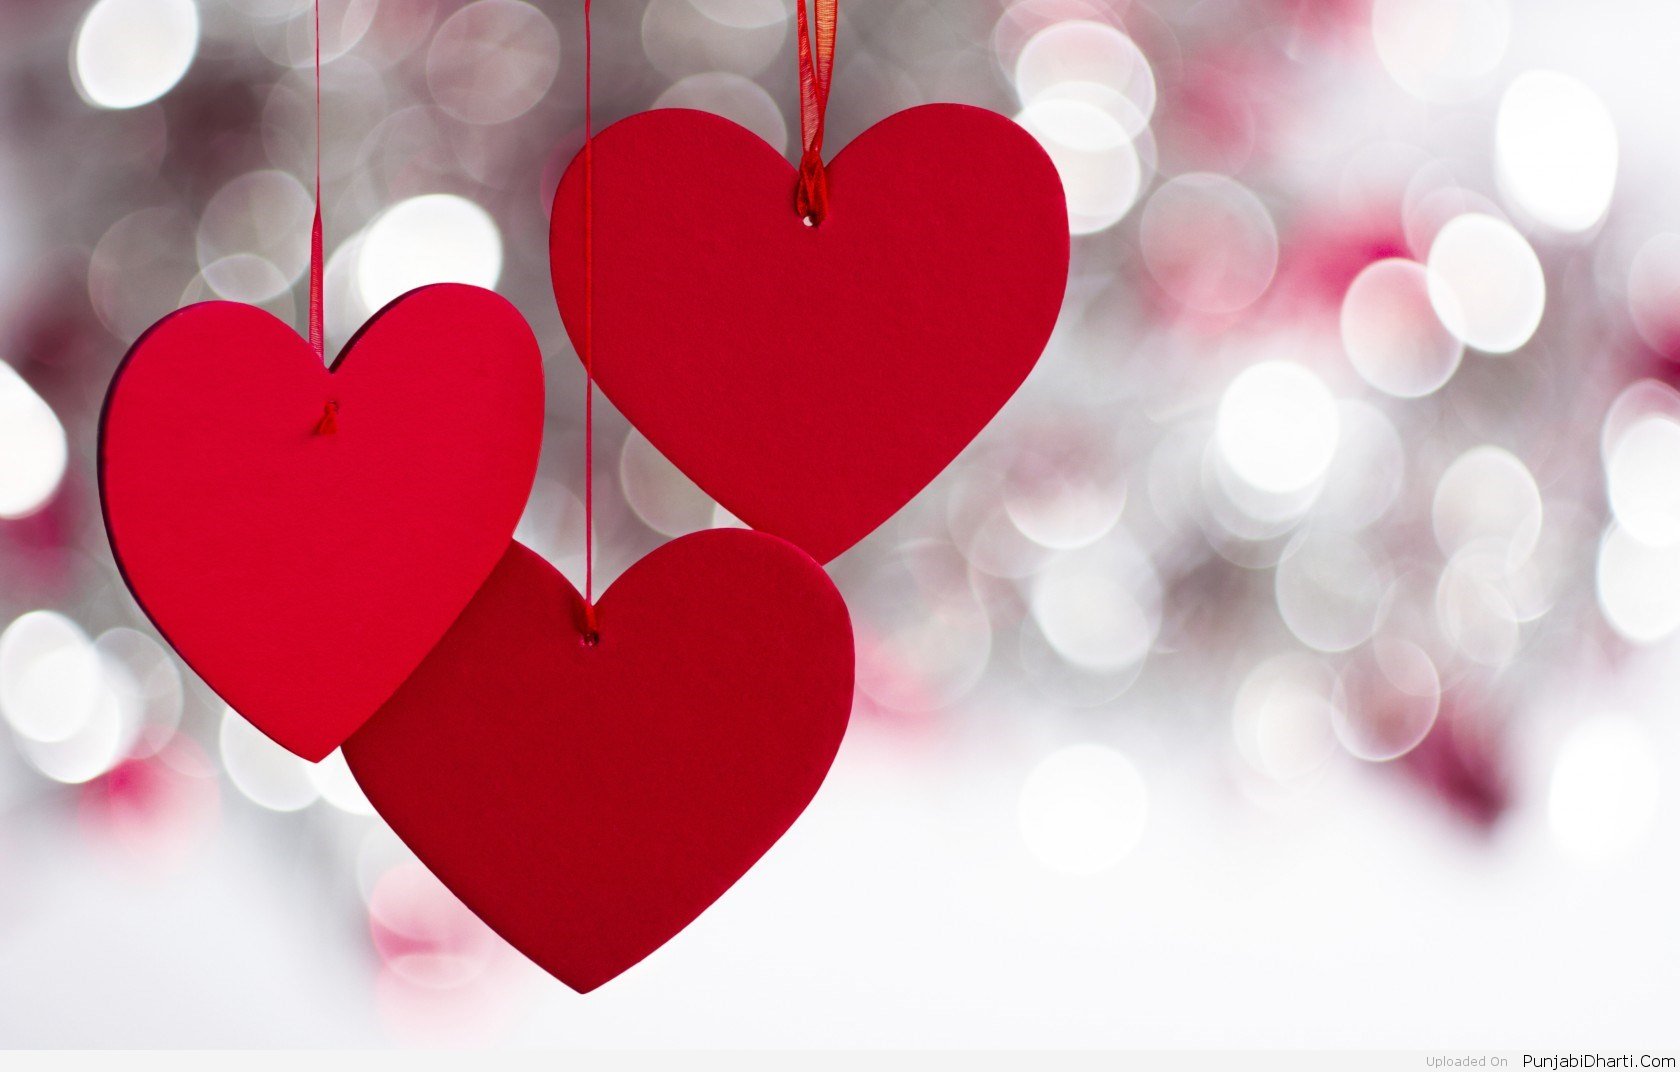 dhokha wallpaper,heart,love,red,valentine's day,organ